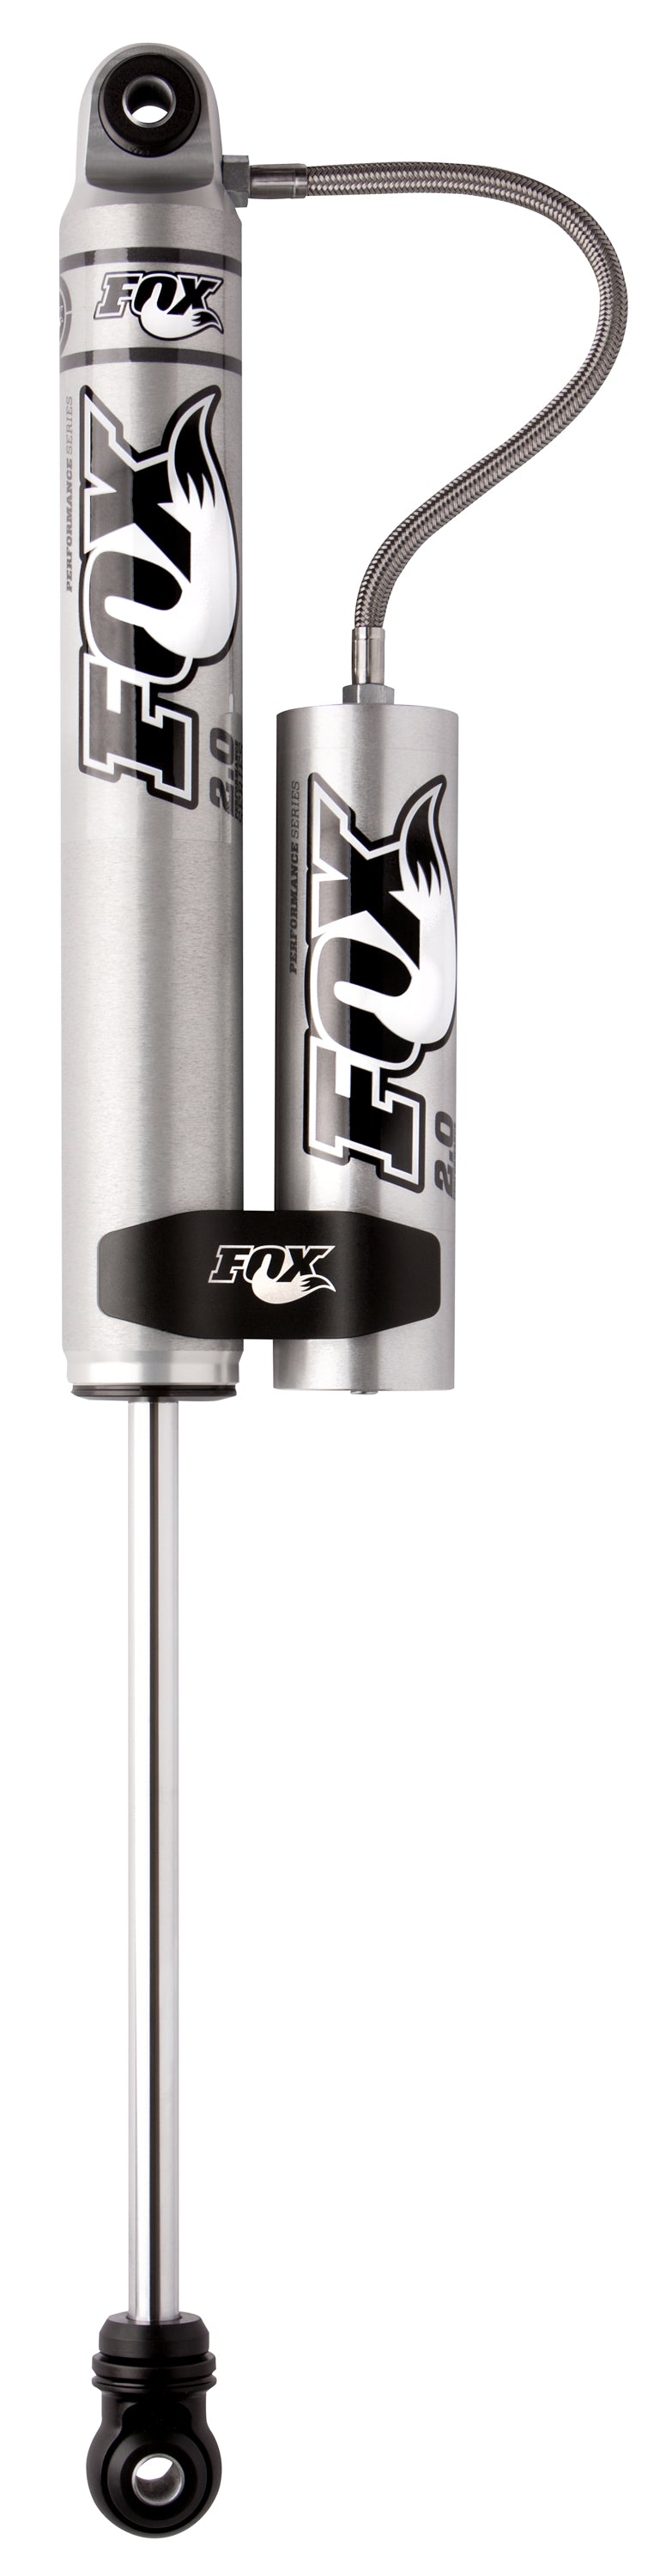 FOX Offroad Shocks 985-24-051 PERFORMANCE SERIES 2.0 X 8.0 SMOOTH BODY RESERVOIR SHOCK - Roam Overland Outfitters